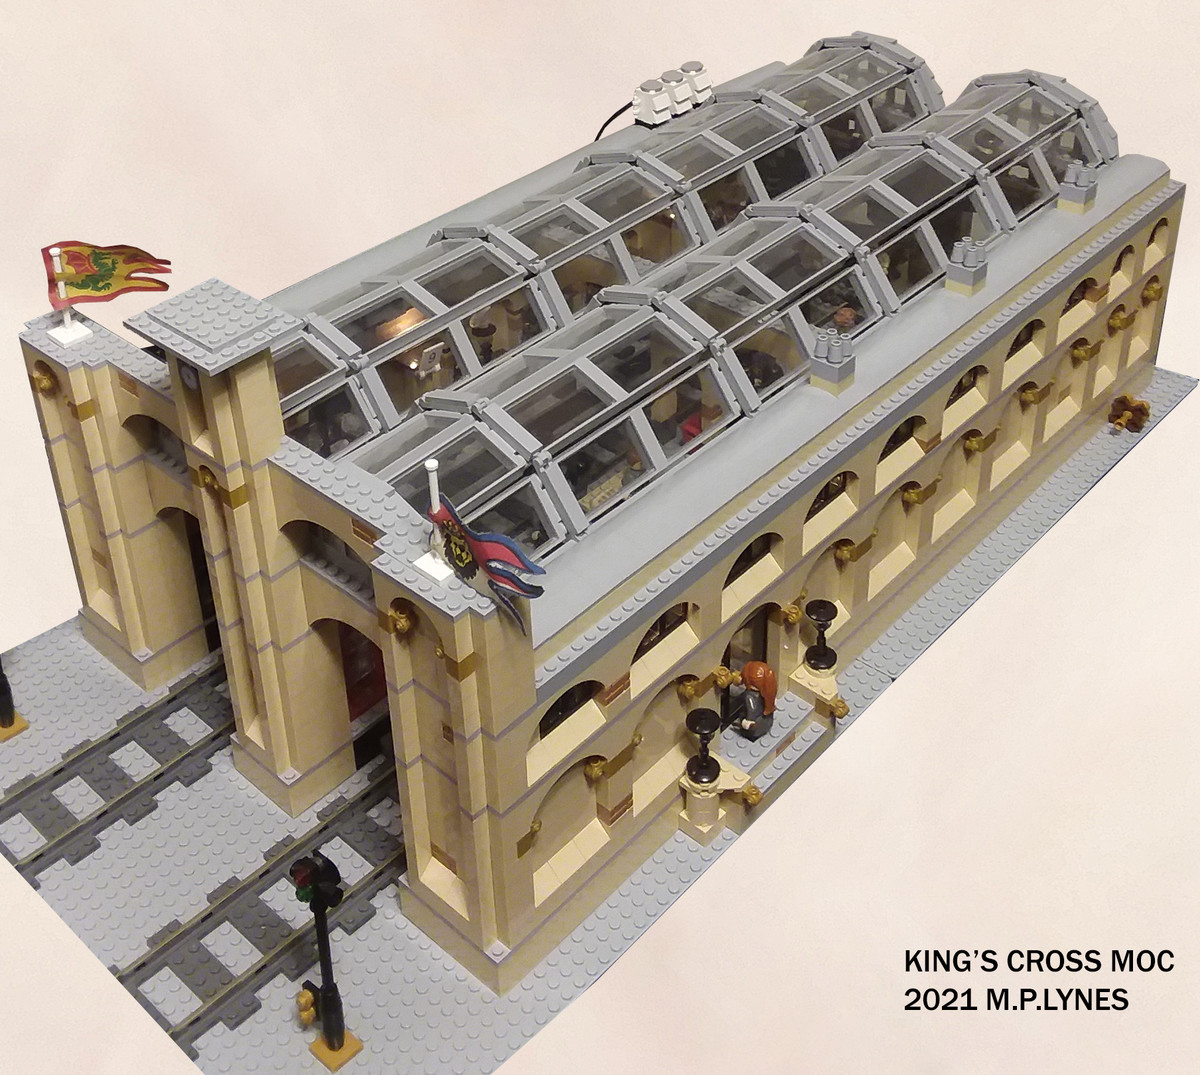 Lego King's Cross at ht: Classic 9V Light System. Phase 1 of the renovations complete. The Lego 9v wire and lights are installed underneath the slopped roof pie